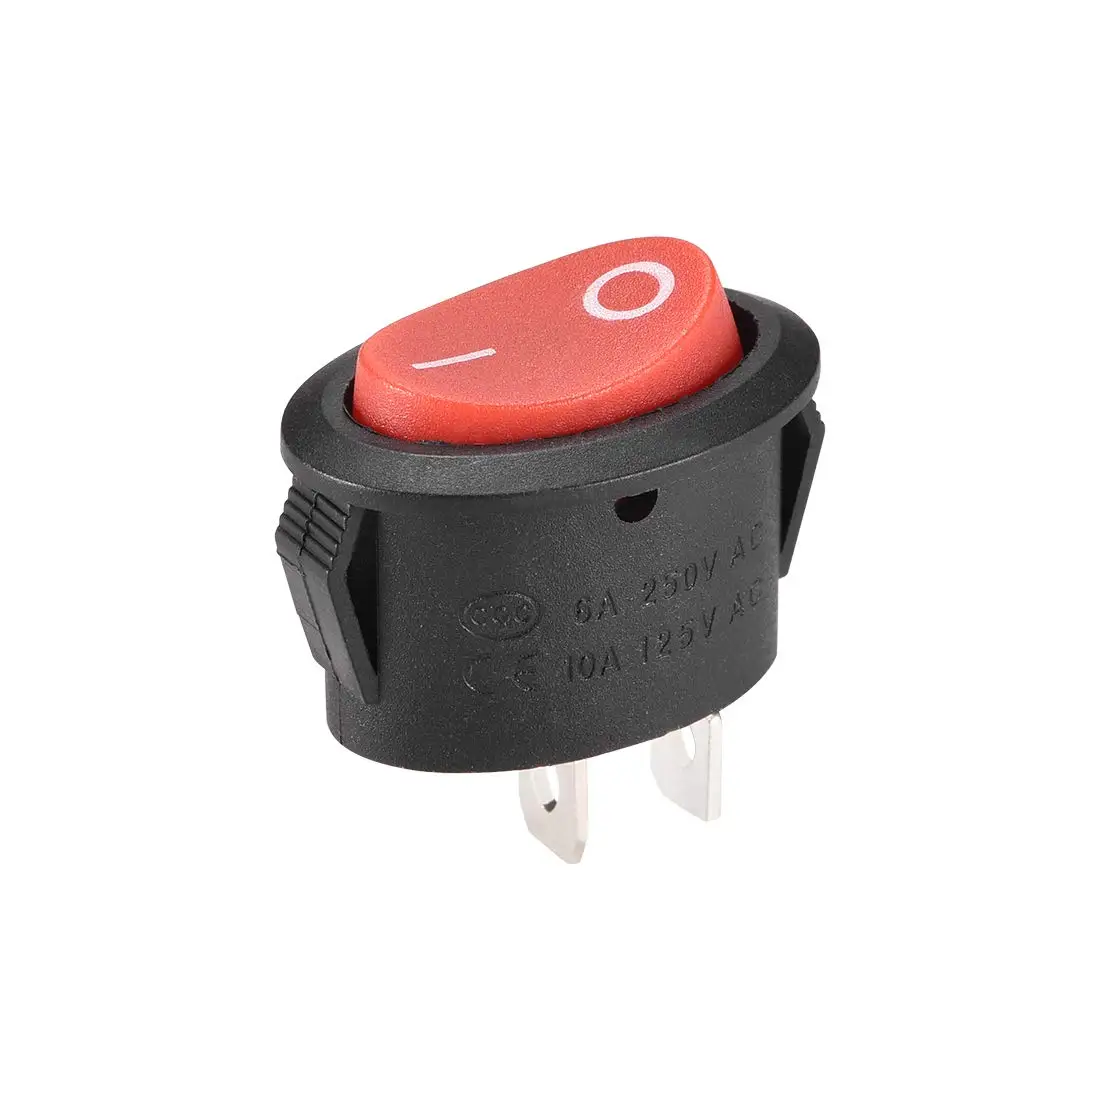 

Keszoox SPST Boat Rocker Switch Oval Red Toggle Switch for Boat Marine 2pins ON/Off AC250V/6A 125V/10A 1pcs